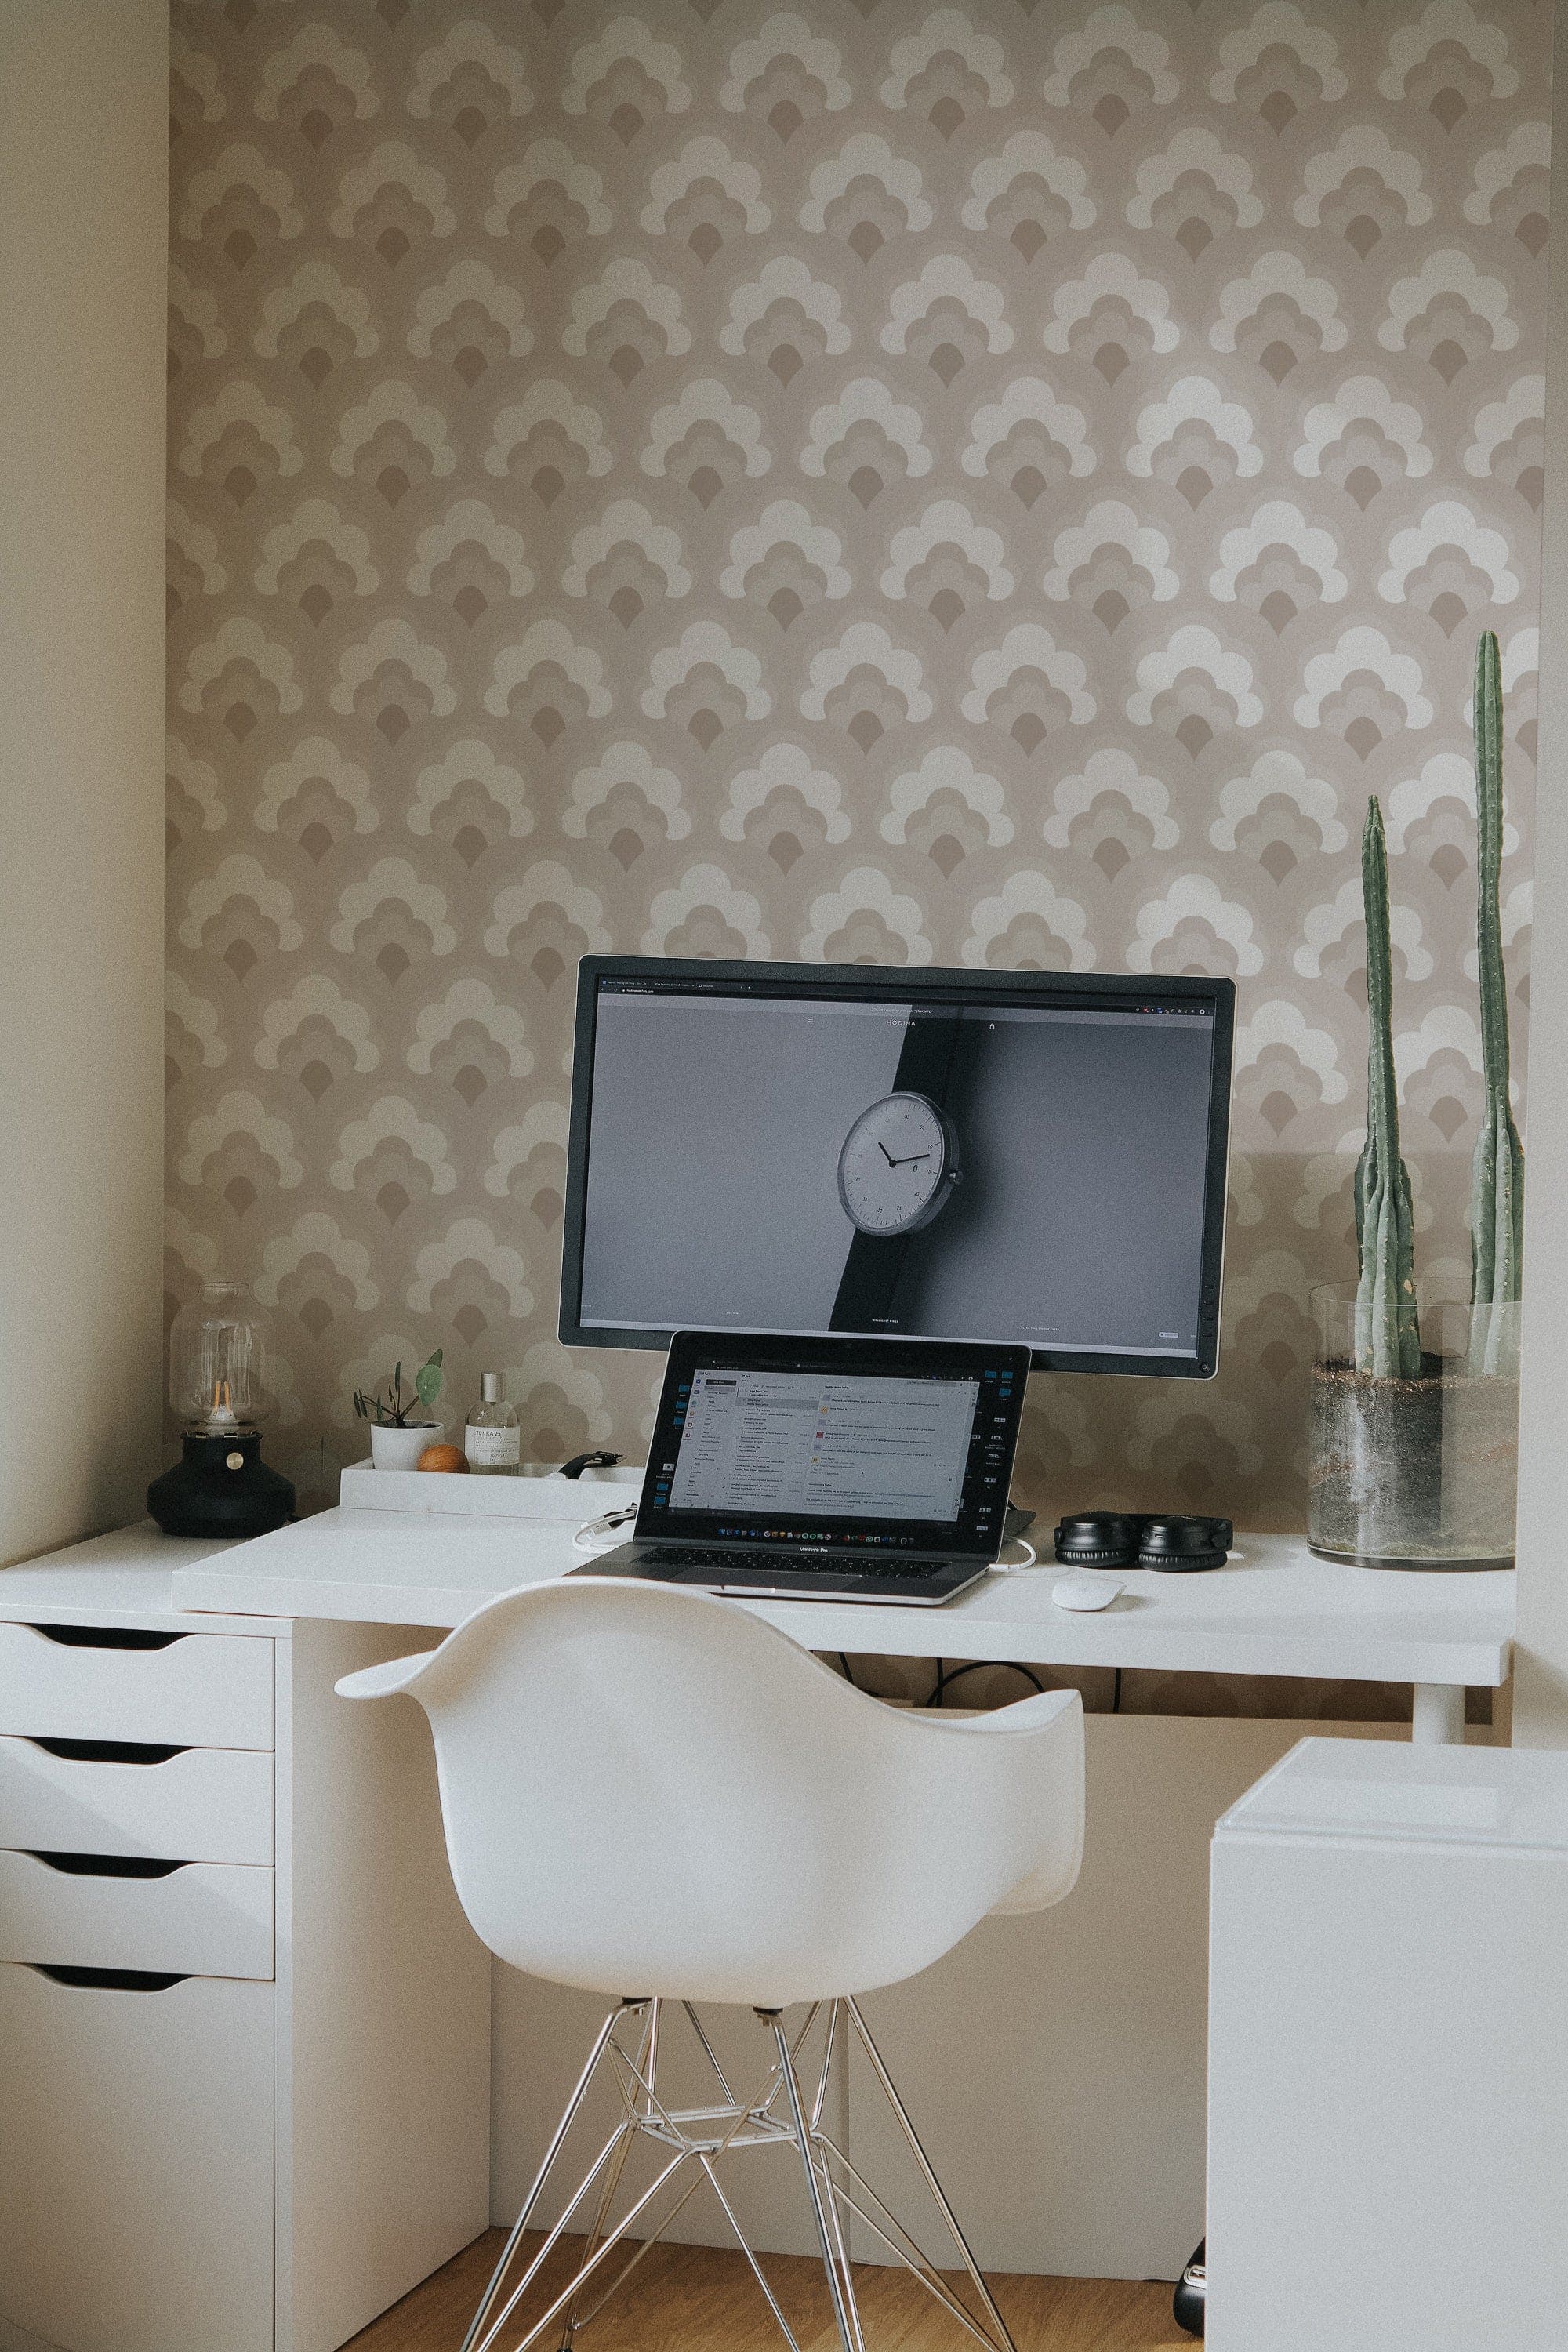 A modern home office setup with 'Scallop Mosaic Wallpaper' adorning the walls, featuring a repetitive beige and white scalloped design. The room is neatly organized with a white desk, a stylish ergonomic chair, and a desktop setup, offering a calm and chic workspace.